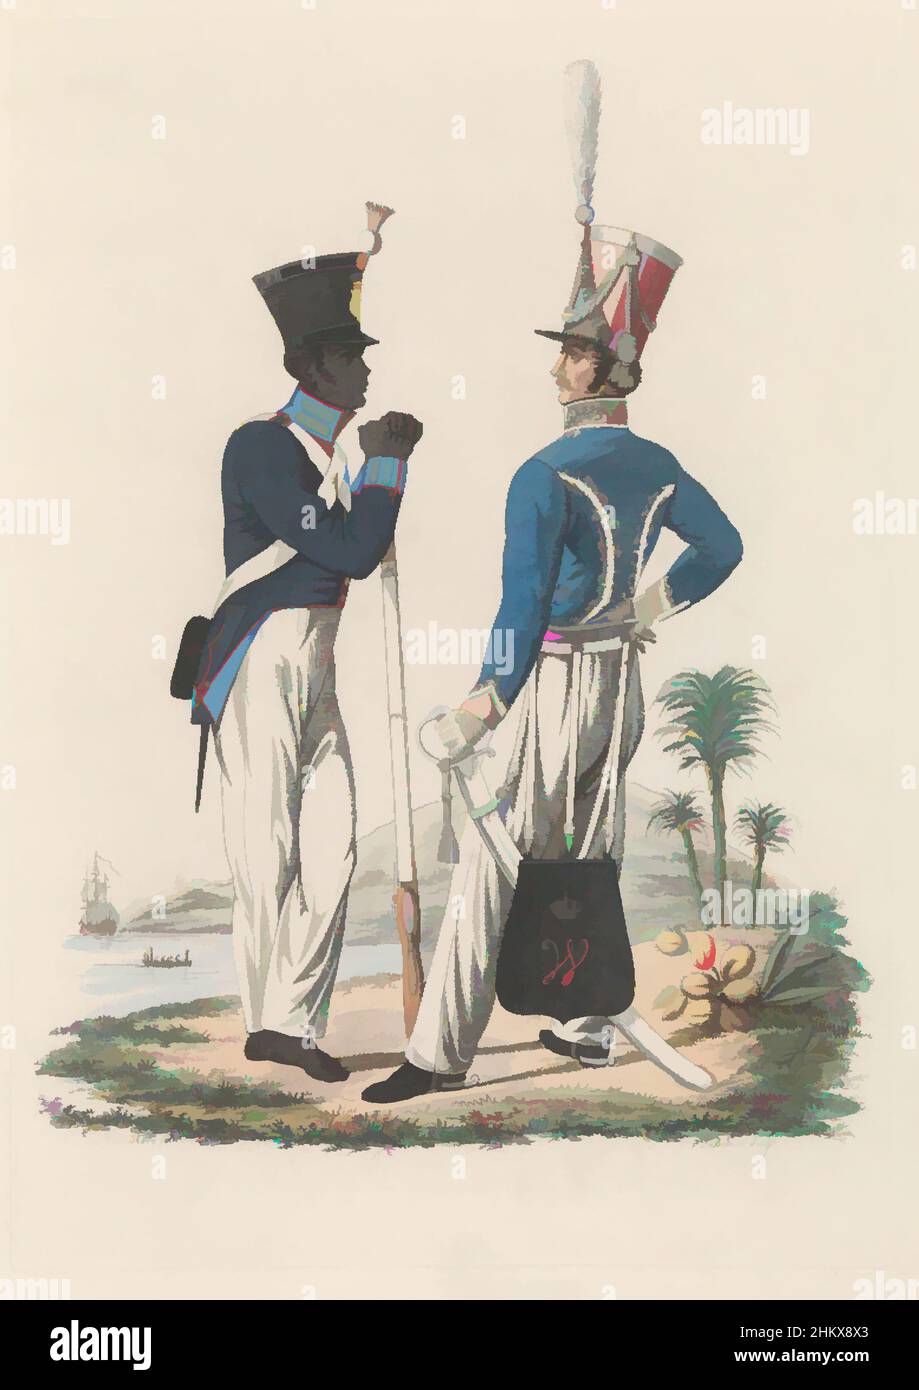 Art inspired by Hussaar, on foot, of Reg. no. 7, and Infanterist (Inlander). Troops in the East Indies, A Dutch hussar of the Regiment Huzaren No. 7 and a barefoot native infantryman. From the Dutch troops in the East Indies. Plate 65. The two standing on the waterfront. Uniform, Classic works modernized by Artotop with a splash of modernity. Shapes, color and value, eye-catching visual impact on art. Emotions through freedom of artworks in a contemporary way. A timeless message pursuing a wildly creative new direction. Artists turning to the digital medium and creating the Artotop NFT Stock Photo